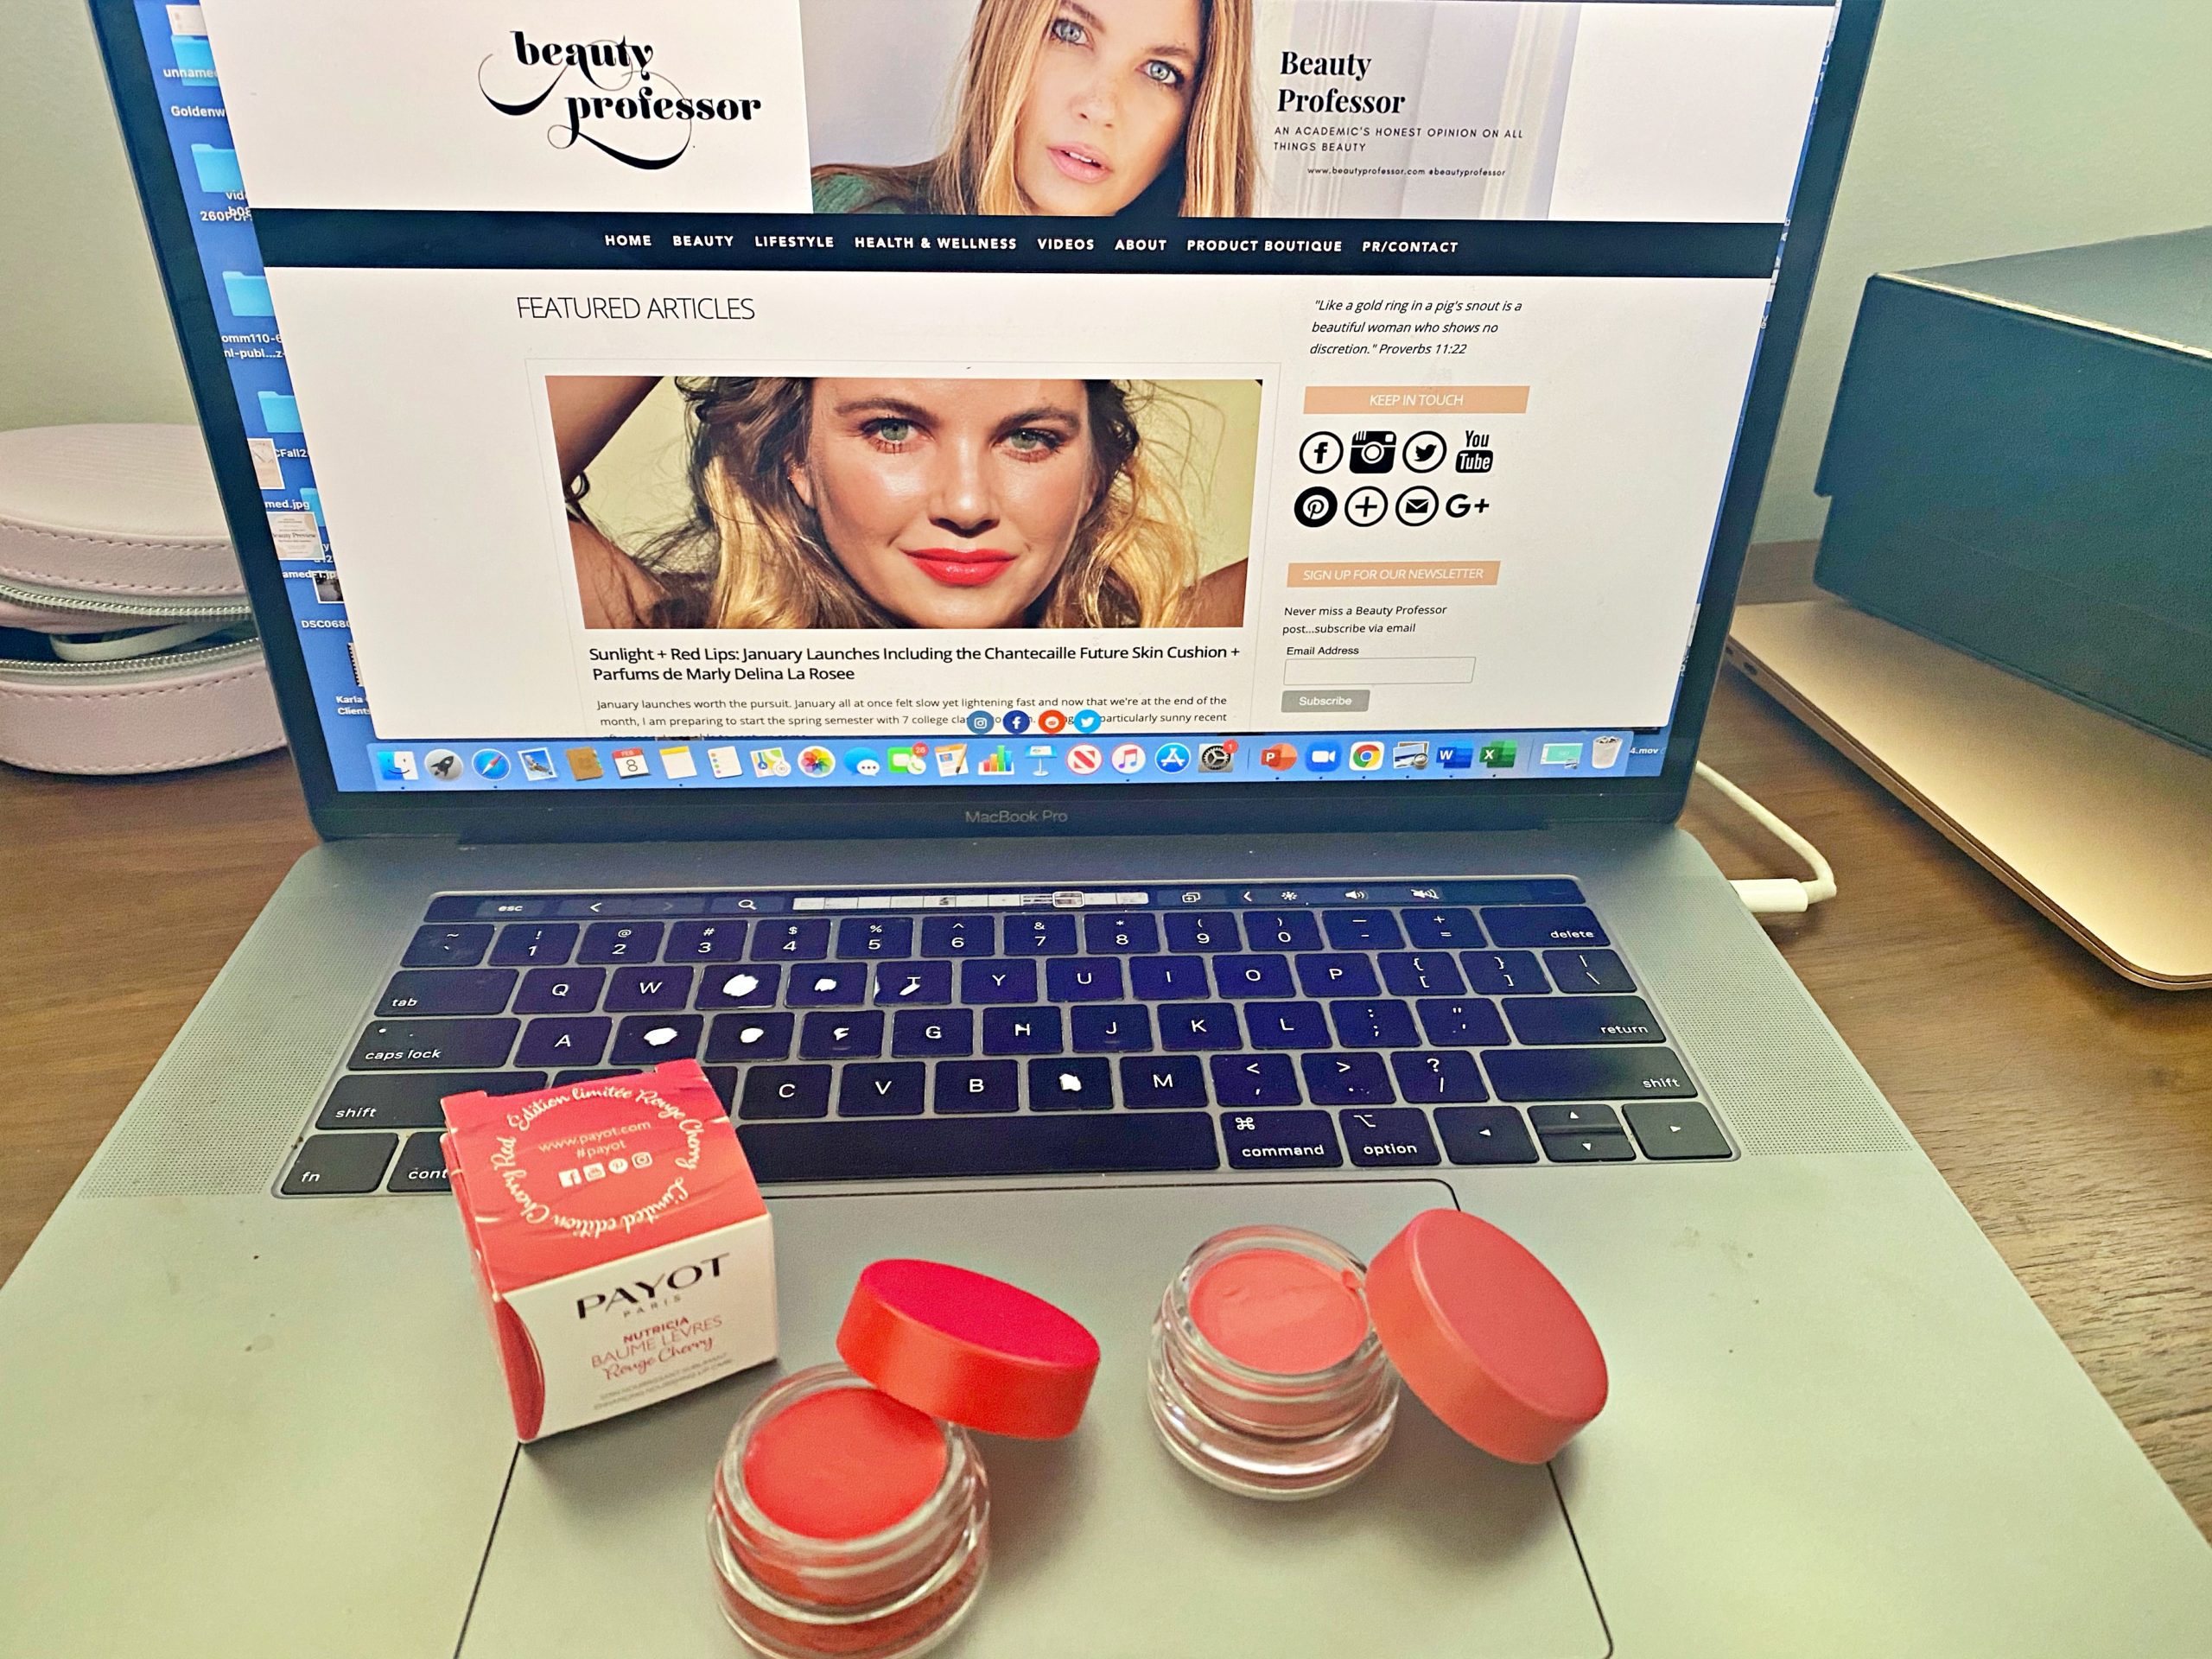 Lip care from Payot